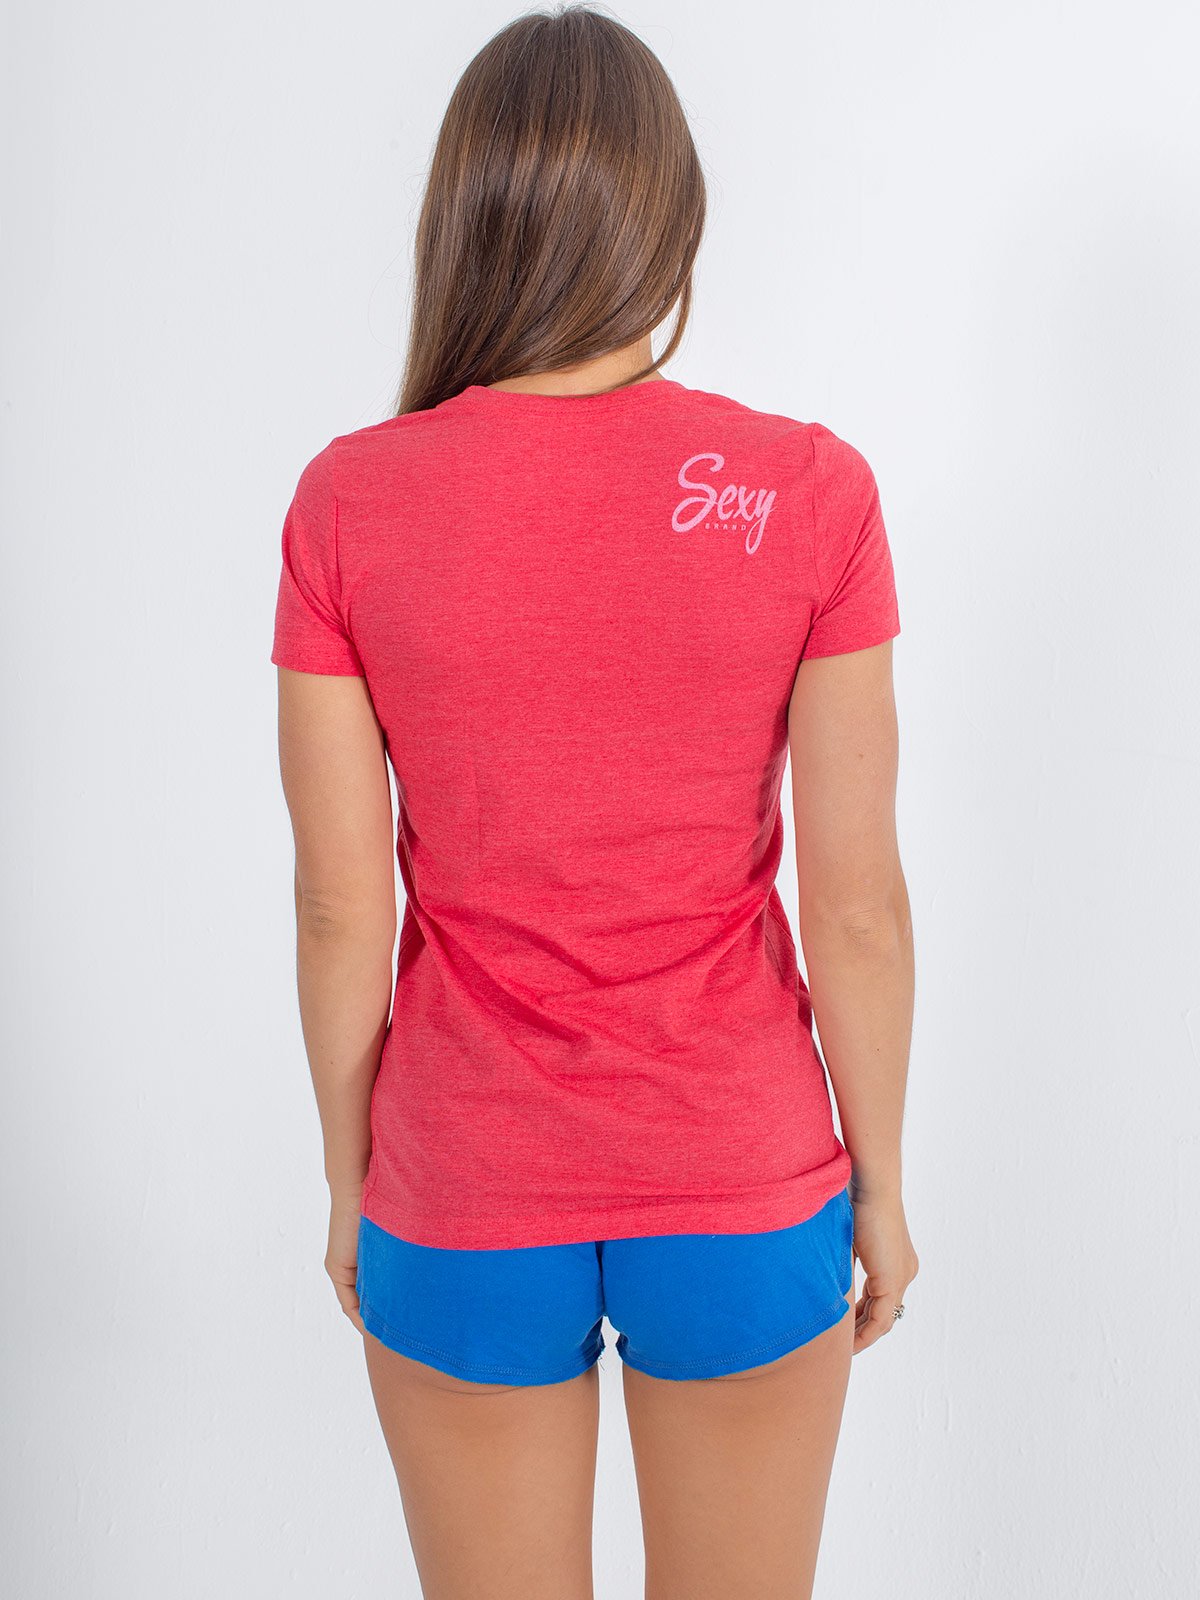 sexy brand womens 3 bar California crew neck red back view sexy detail